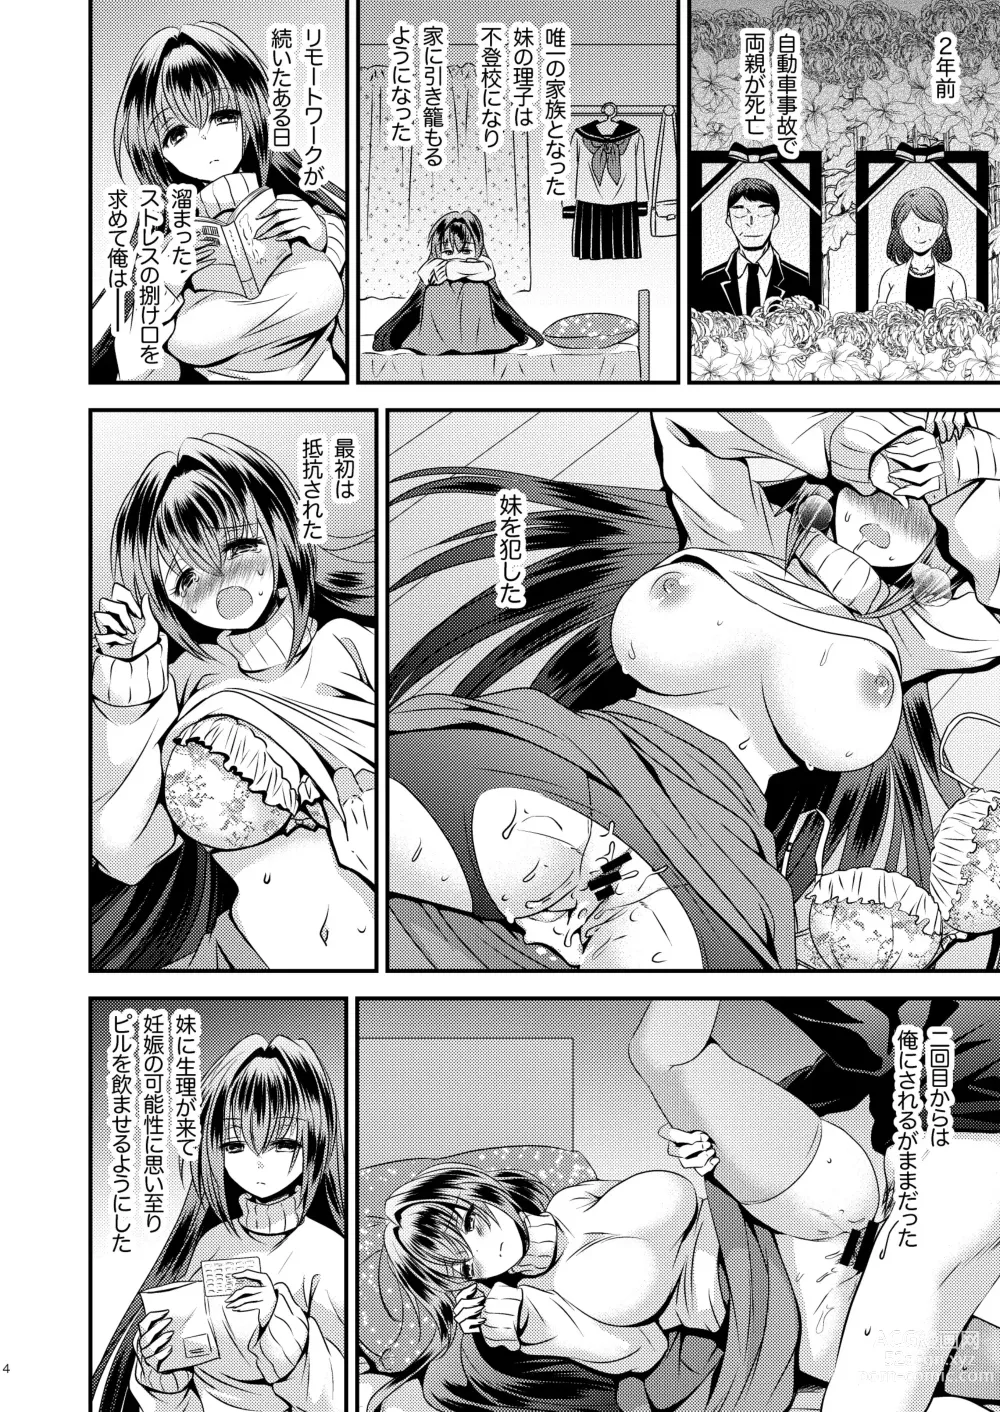 Page 4 of doujinshi 性欲処理に使っていた妹と入れ替わった兄